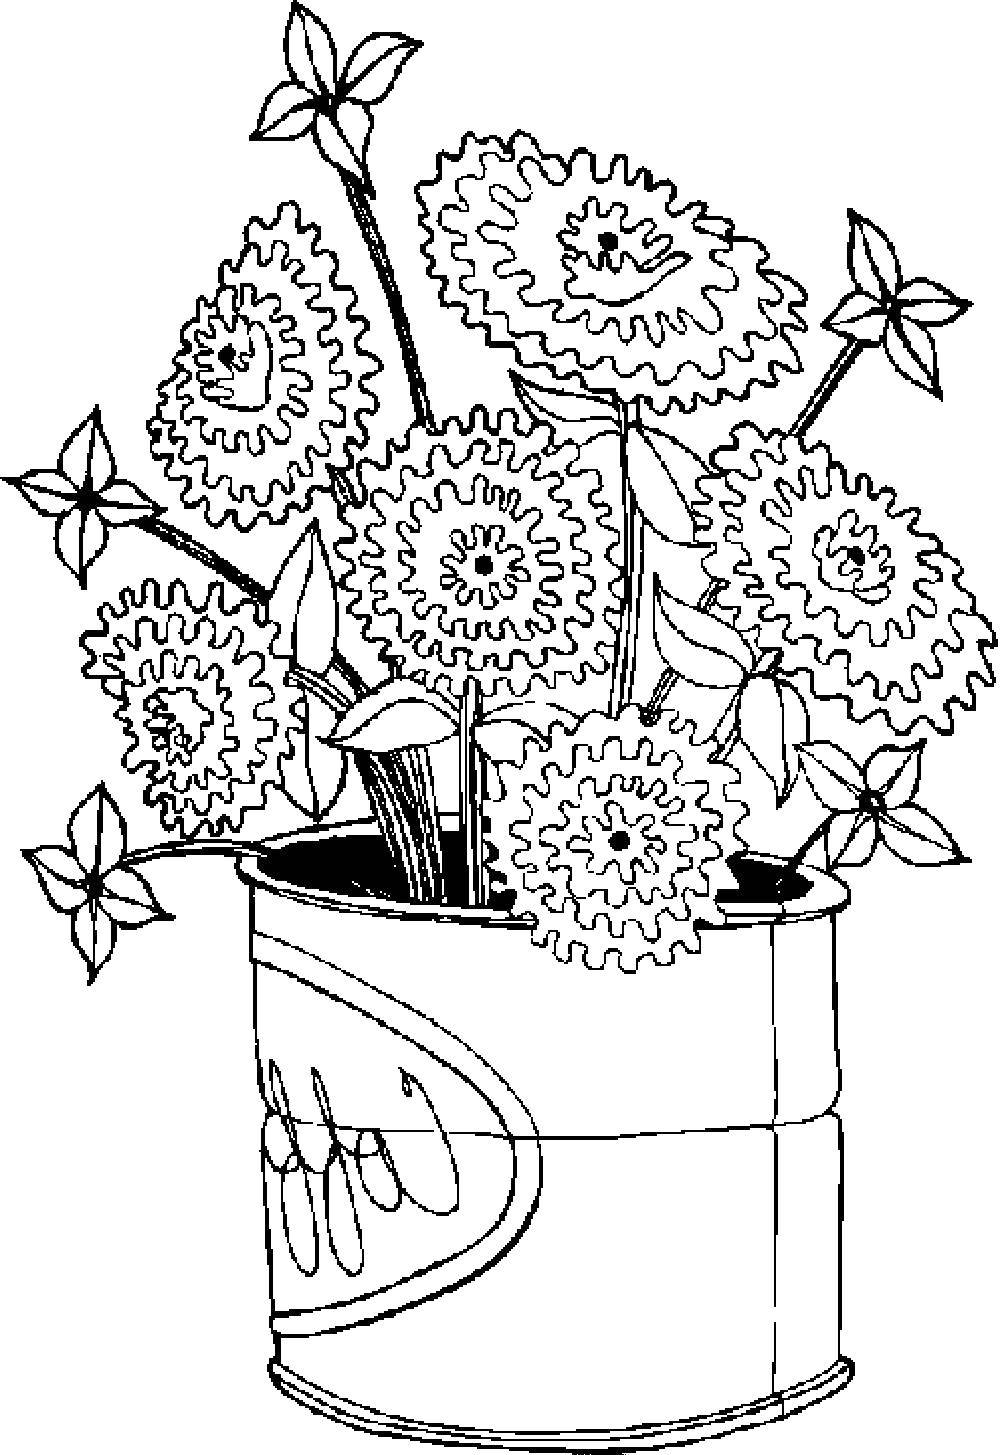 Coloring Flowers. Category For girls. Tags:  flowers, plants, buds, petals.